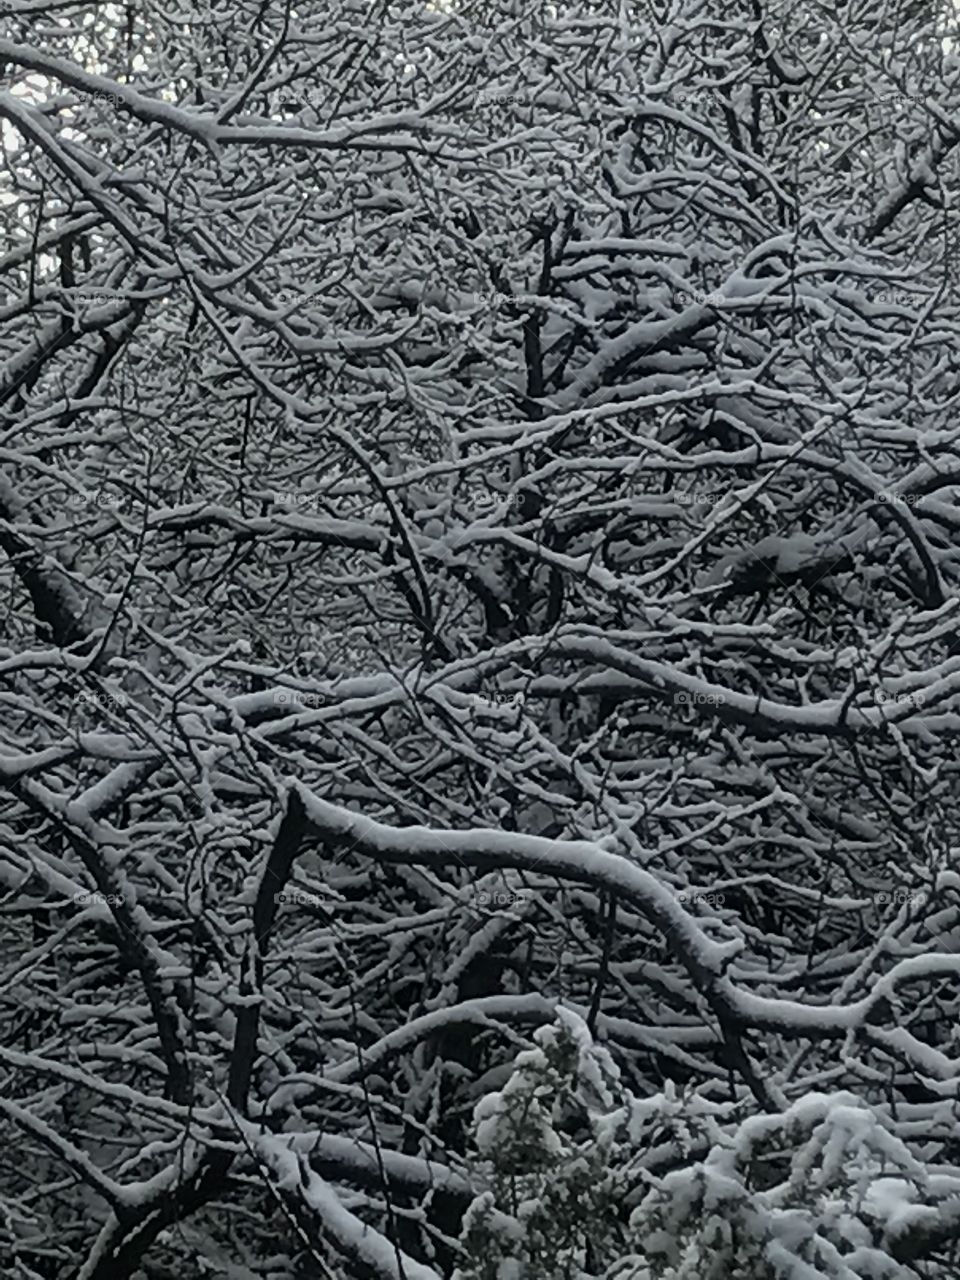 A snowy web of branches